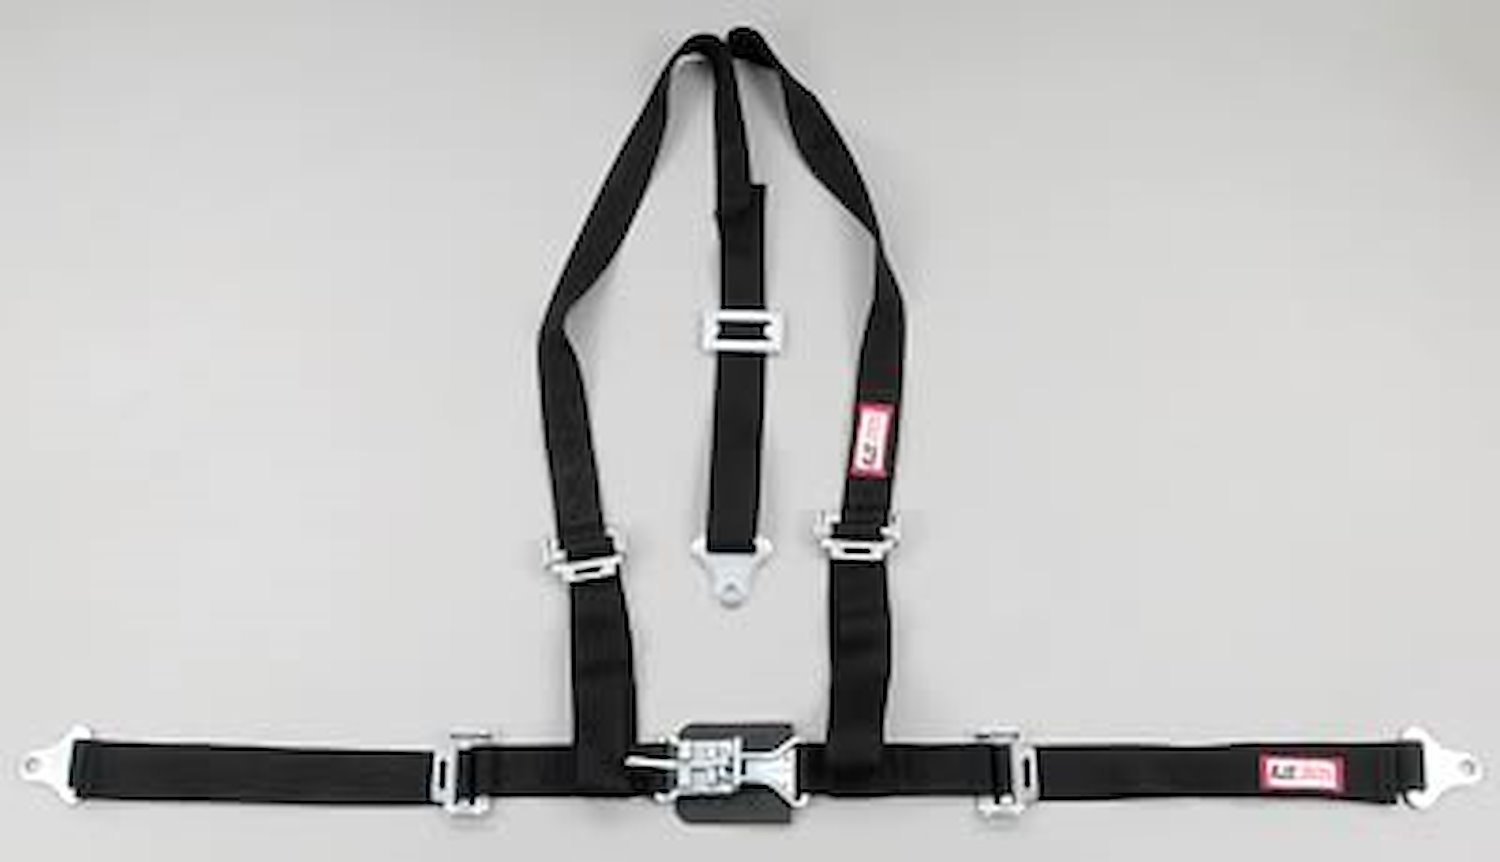 NON-SFI L&L HARNESS 3 PULL UP Lap BELT SNAP SEWN IN 2 S.H. Y FLOOR Mount w/STERNUM STRAP WRAP/BOLT BLACK